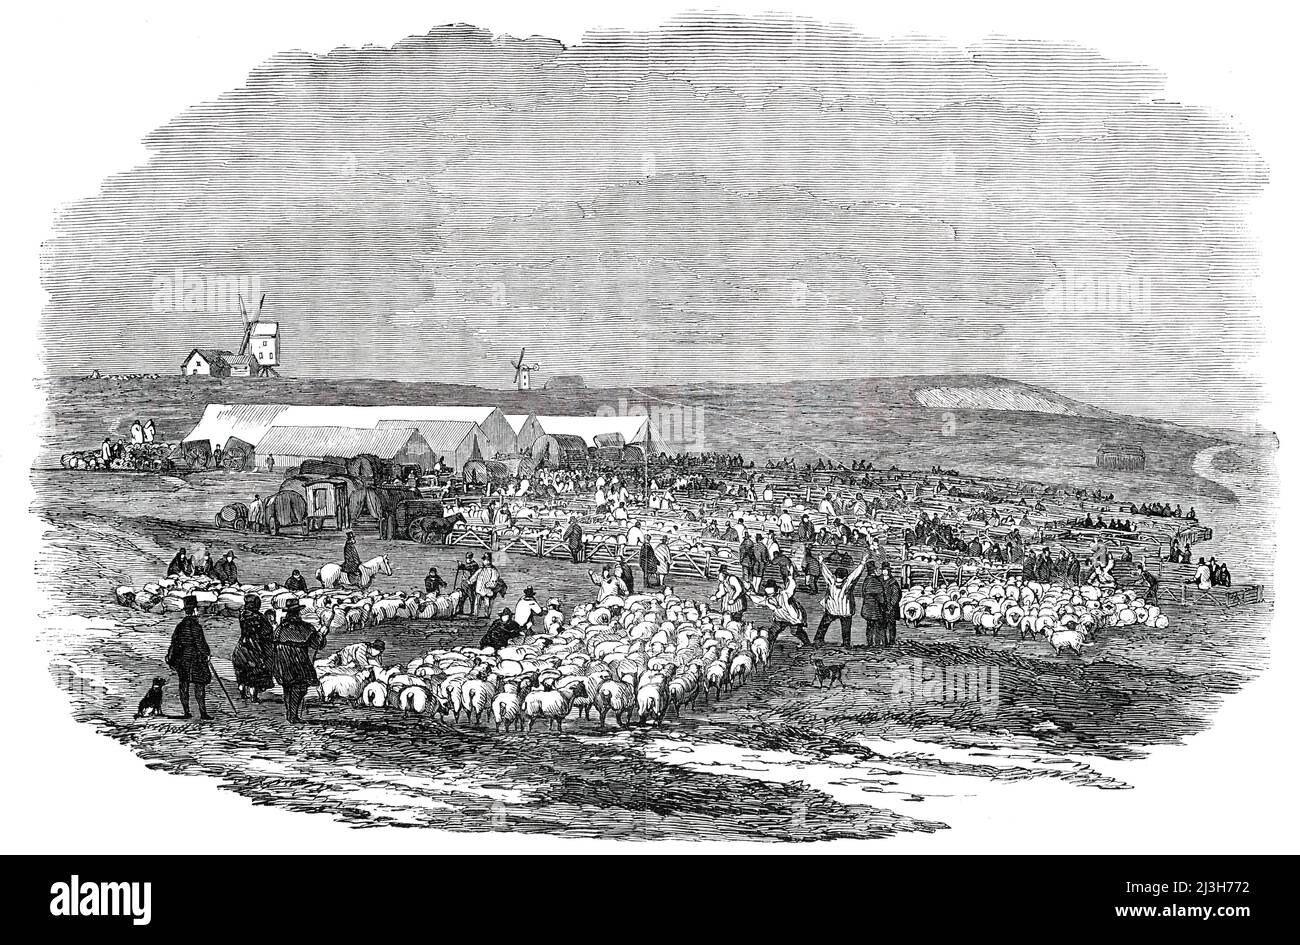 Lewes Great Sheep Fair, 1850. Livestock market in Sussex, held at '...Landport Farm, lying at the back of the New Gaol...Among the earliest...sales of the day, were two pens of ewes belonging to the Messrs. Hampton of Applesham. Several parties were in waiting for them, and we believe one of the lots (100) was sold before the sheep were fairly in the pen, at 35s[hillings]. These sheep attracted a good deal of attention, and were much admired...For lambs the demand was very brisk...For cull ewe lambs, however, there was not much inquiry; 15s. was about the current price, and. many of these were Stock Photo